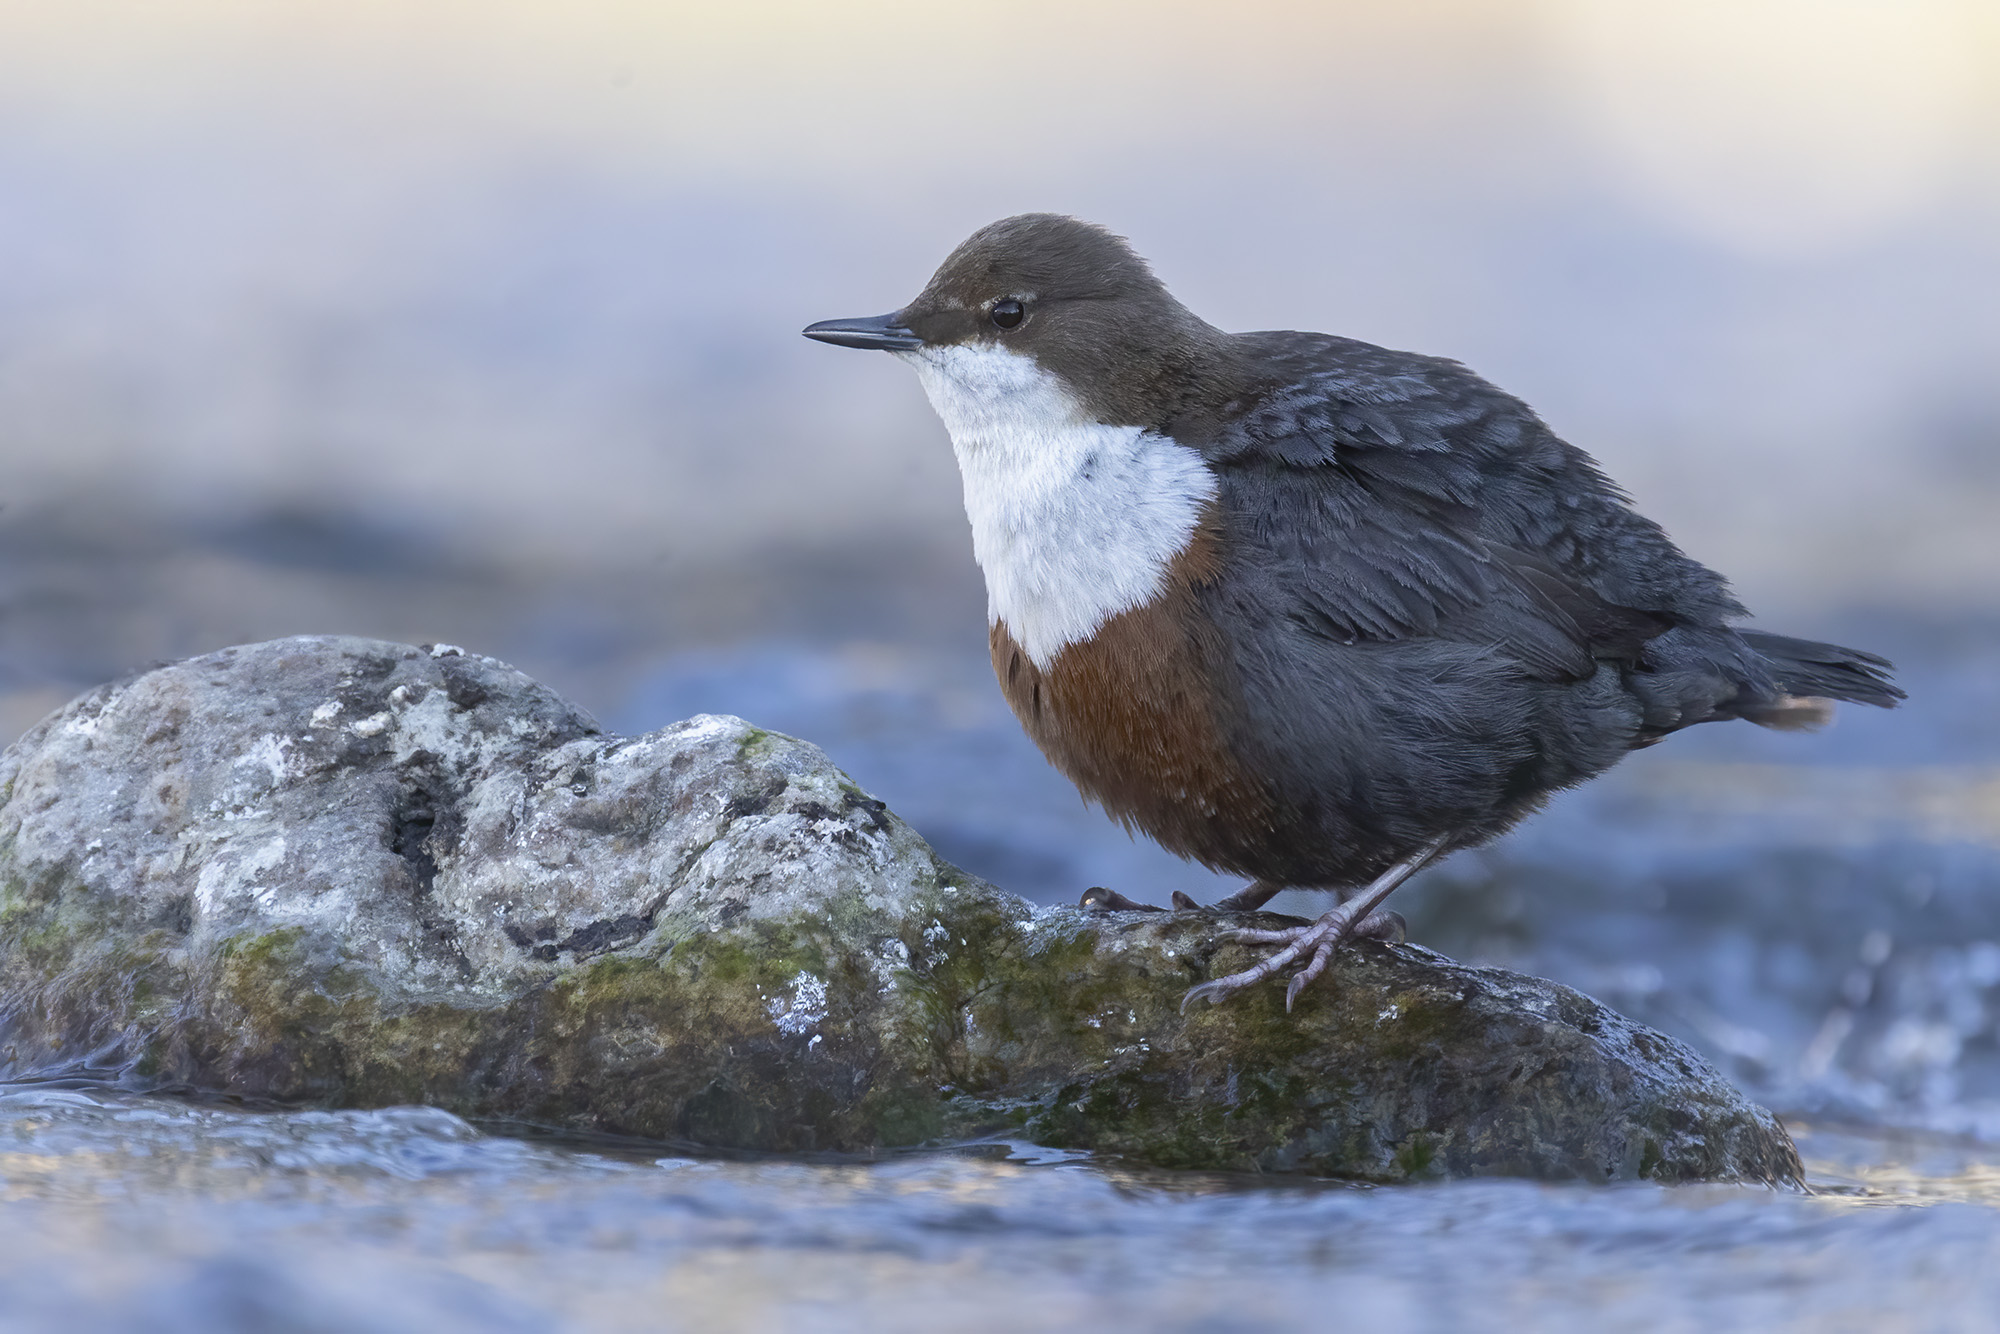 swell feathers, dipper...